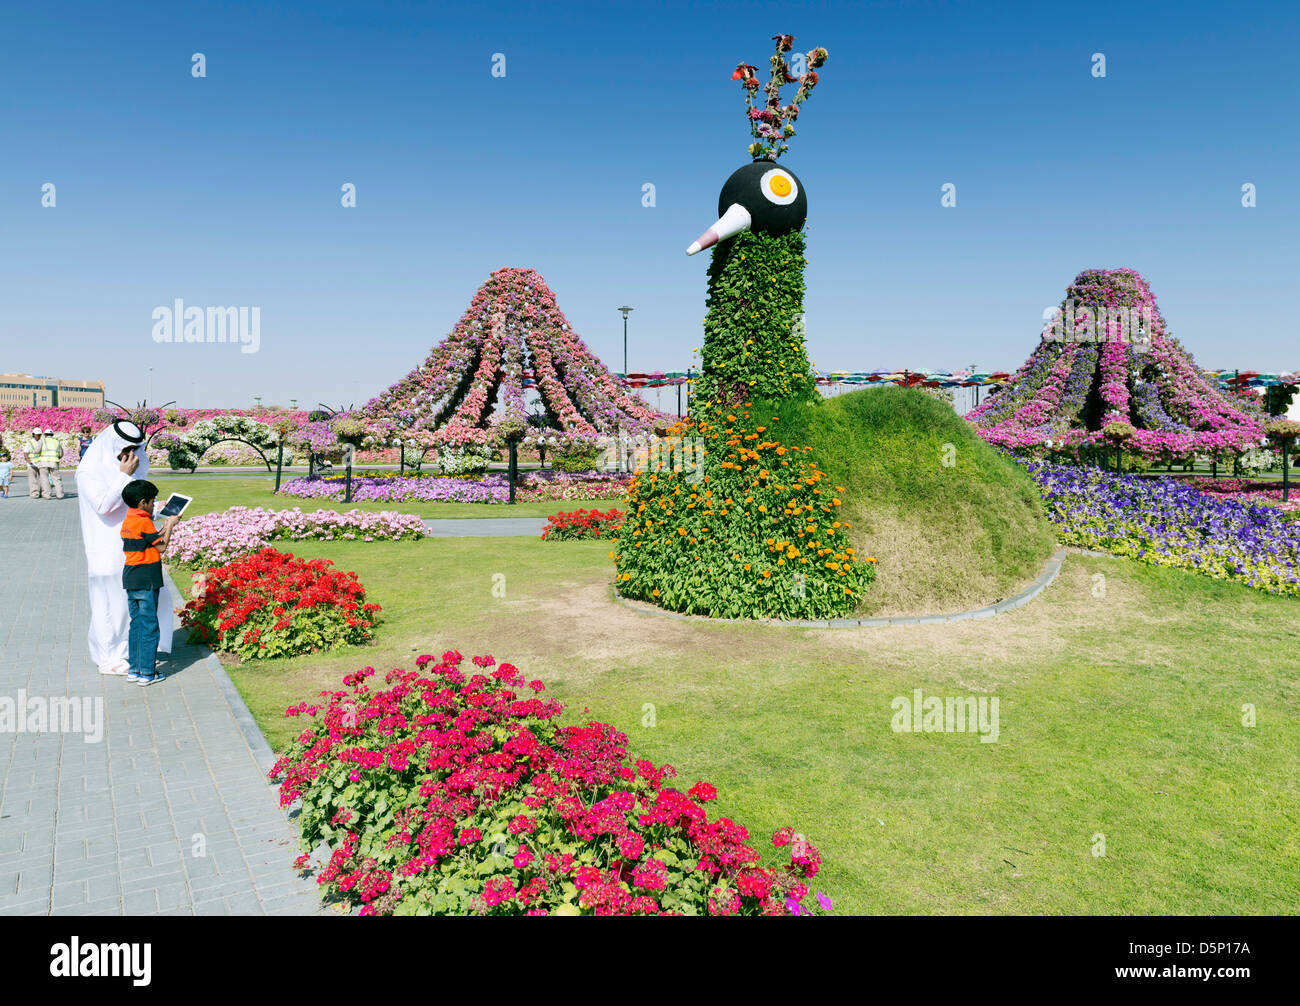 Miracle Garden in Dubai, Opened in March 2013 and claimed to be World's largest flower garden; United Arab Emirates Stock Photo